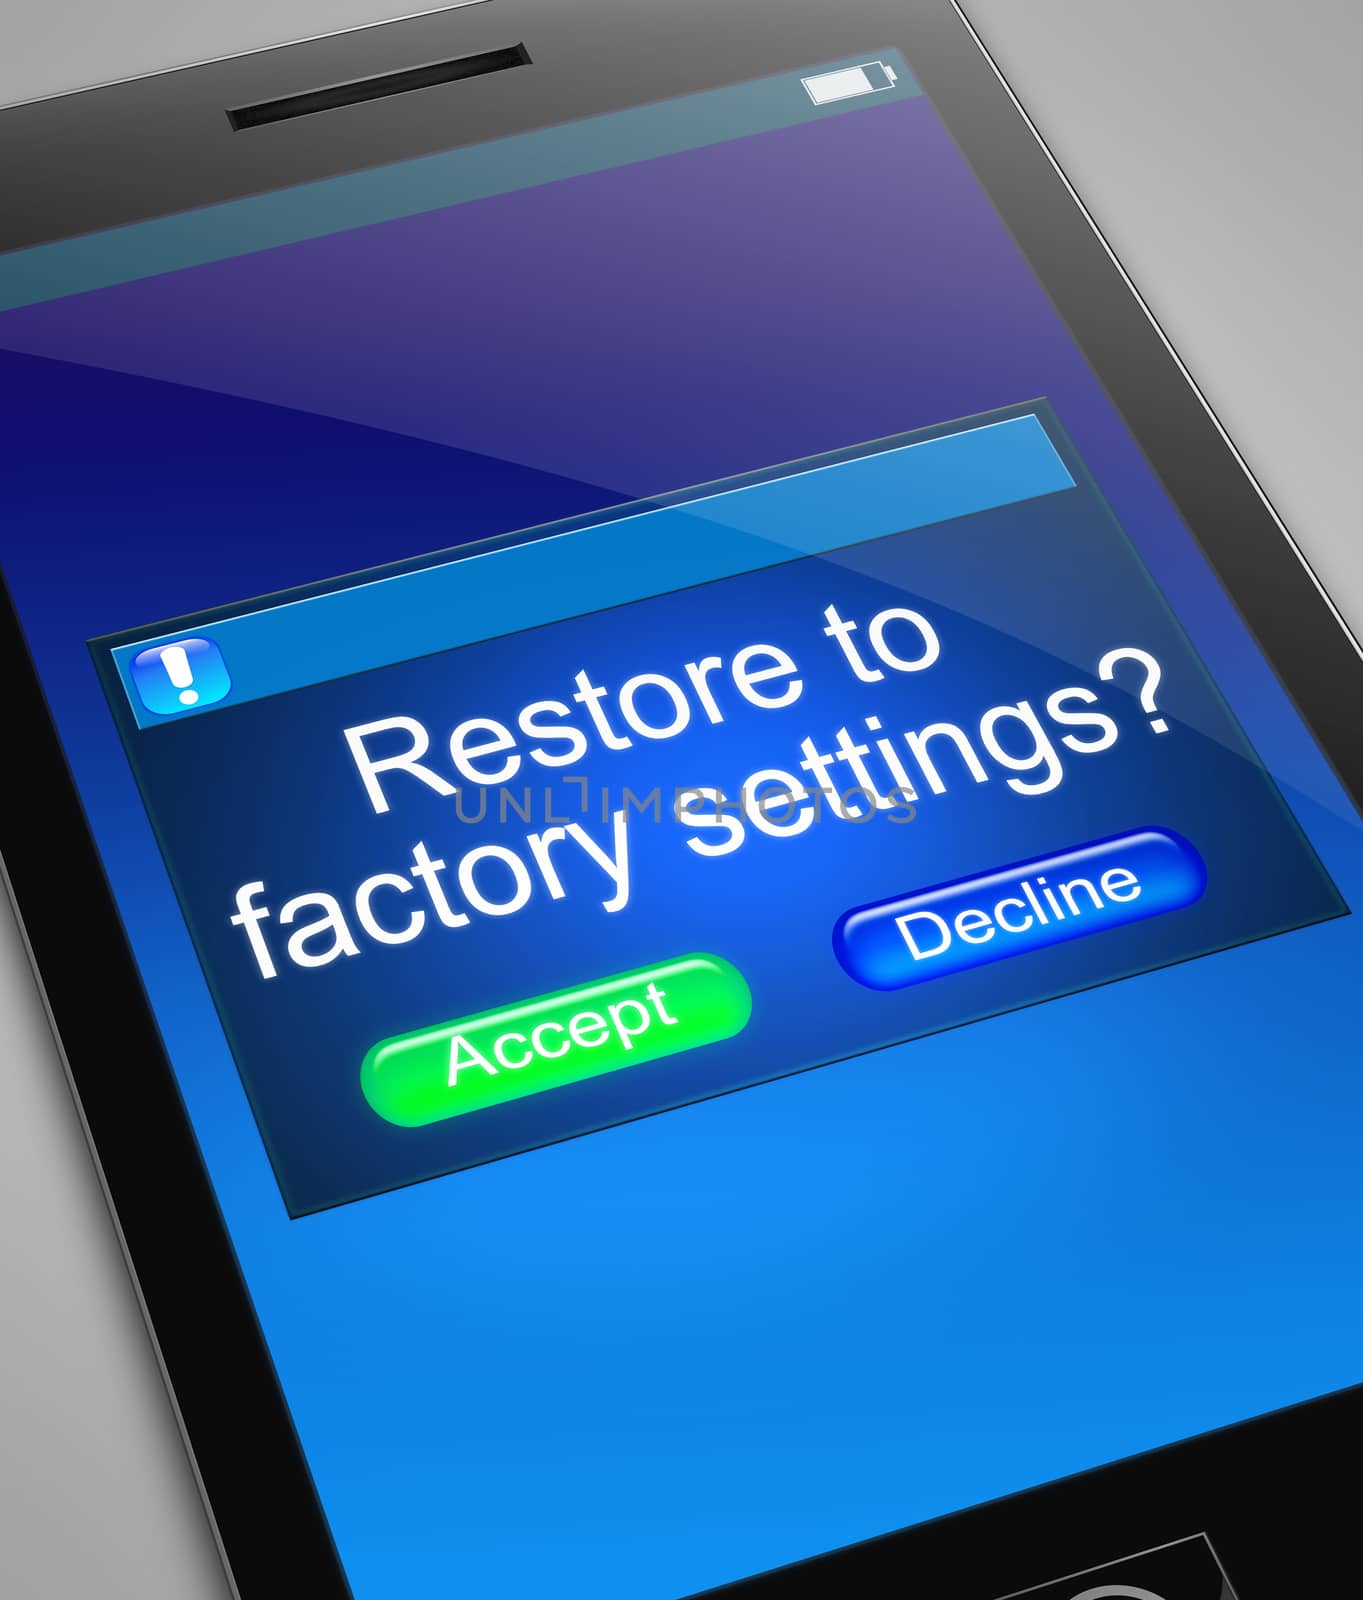 Restore to factory settings. by 72soul